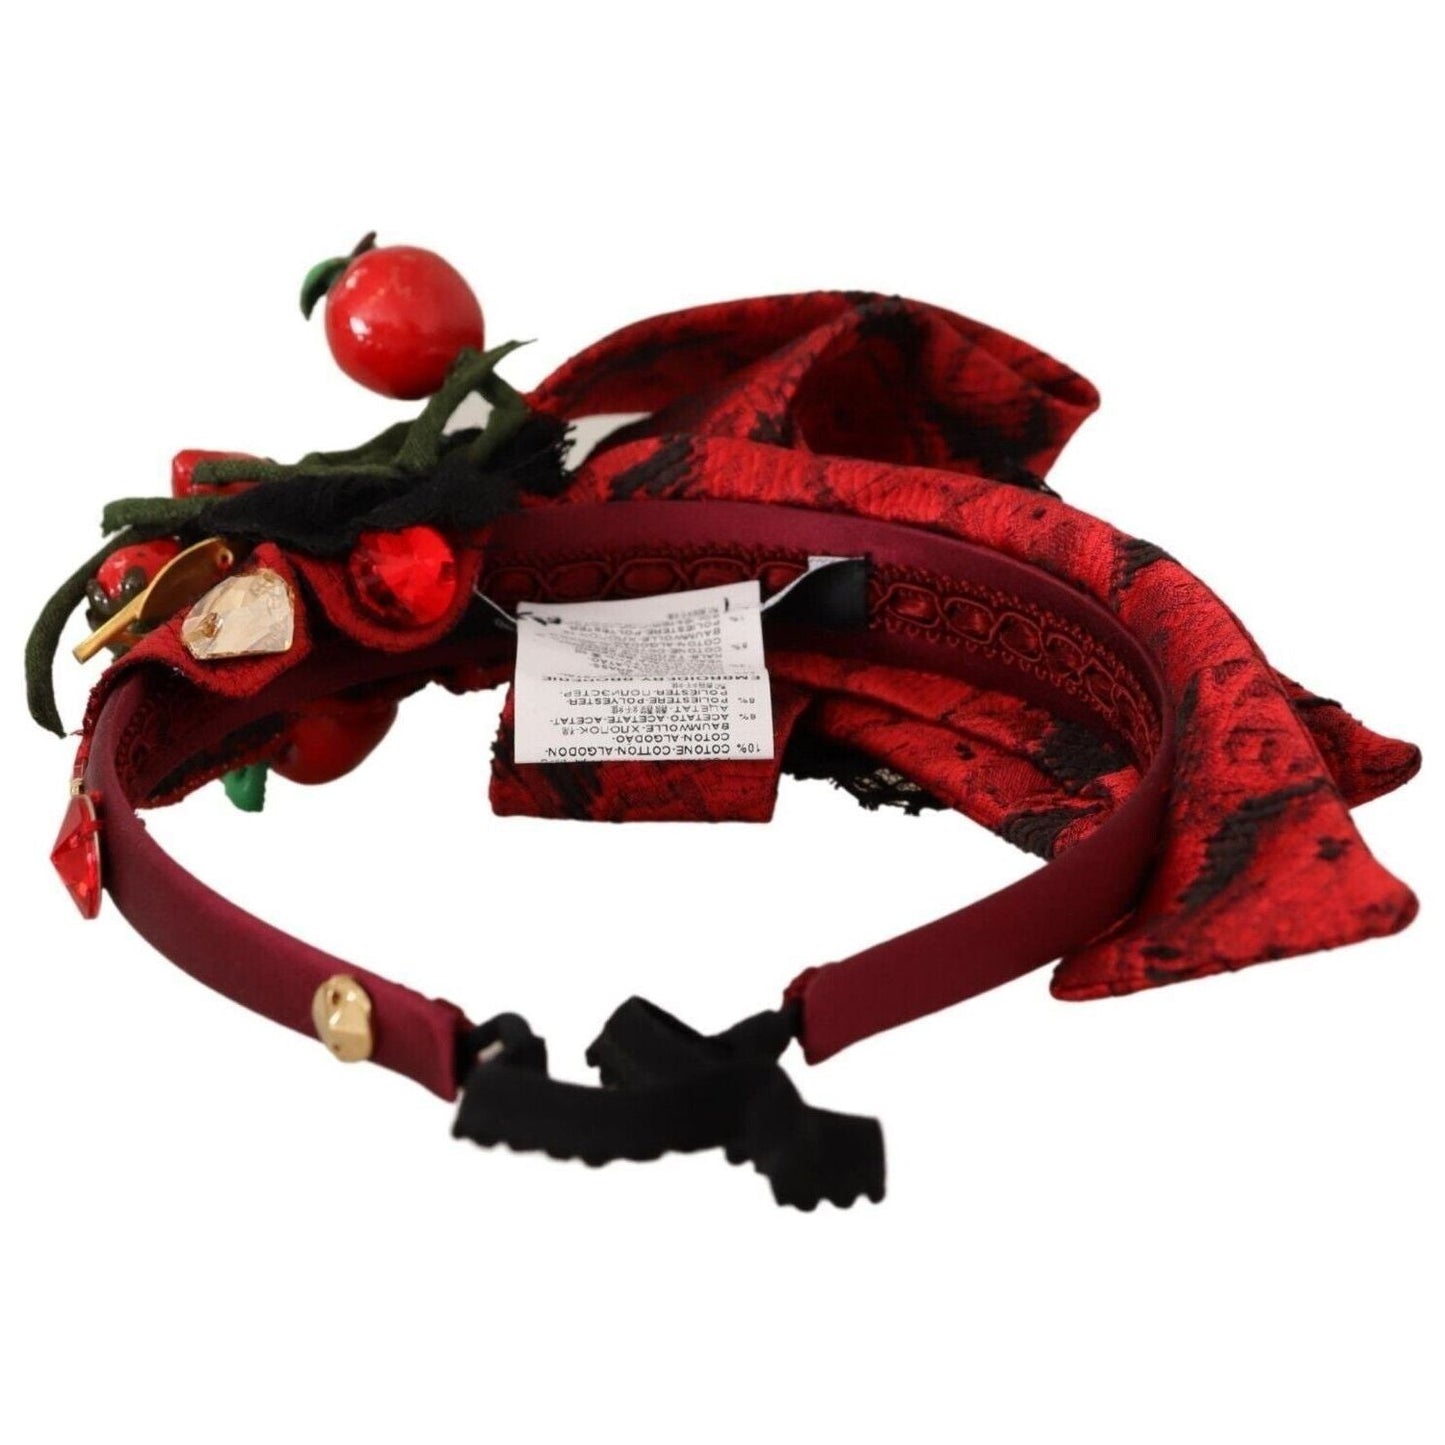 Dolce & Gabbana Exquisite Berry Crystal Embellished Diadem red-tiara-berry-fruit-crystal-bow-hair-diadem-headband